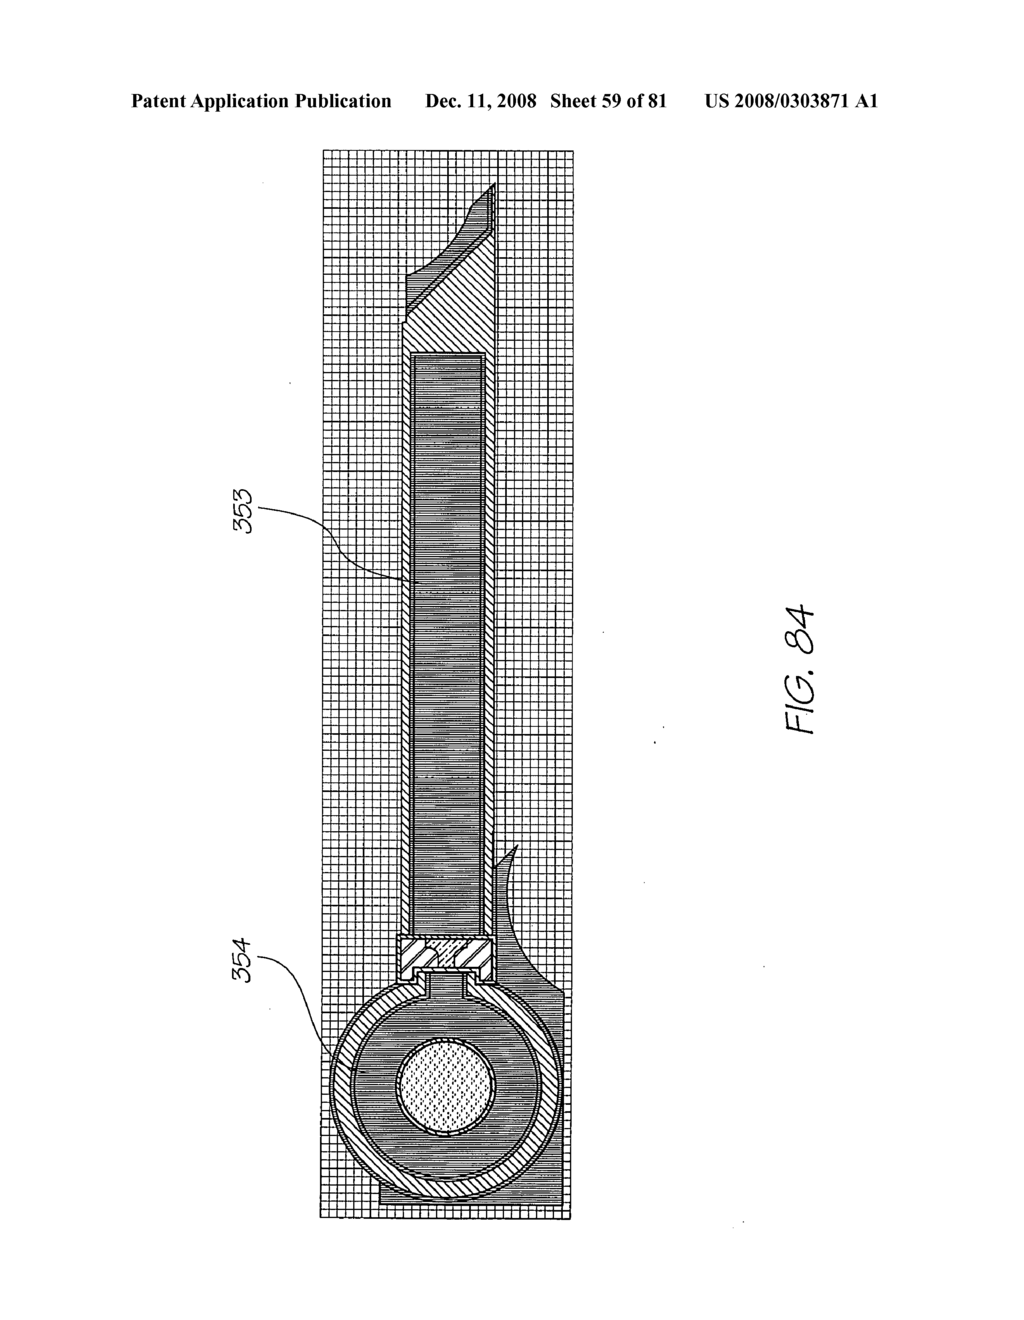 NOZZLE ASSEMBLY FOR AN INKJET PRINTER FOR EJECTING A LOW VOLUME DROPLET - diagram, schematic, and image 60